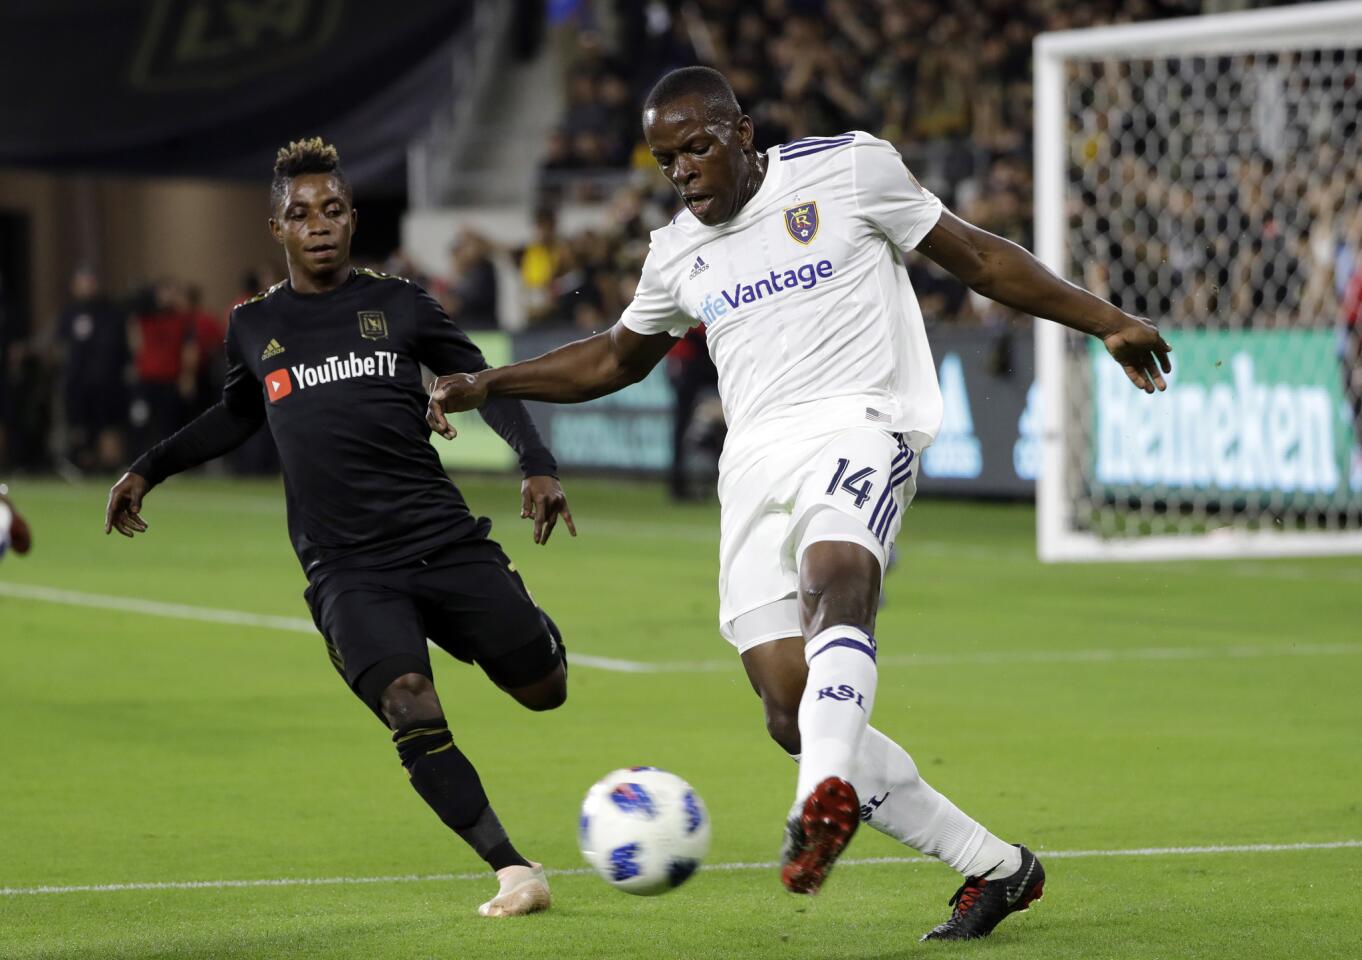 Real Salt Lake's Nedum Onuoha, right, clears the ball as Los Angeles FC's Latif Blessing closes in during the first half of an MLS soccer playoff match Thursday, Nov. 1, 2018, in Los Angeles. (AP Photo/Marcio Jose Sanchez)